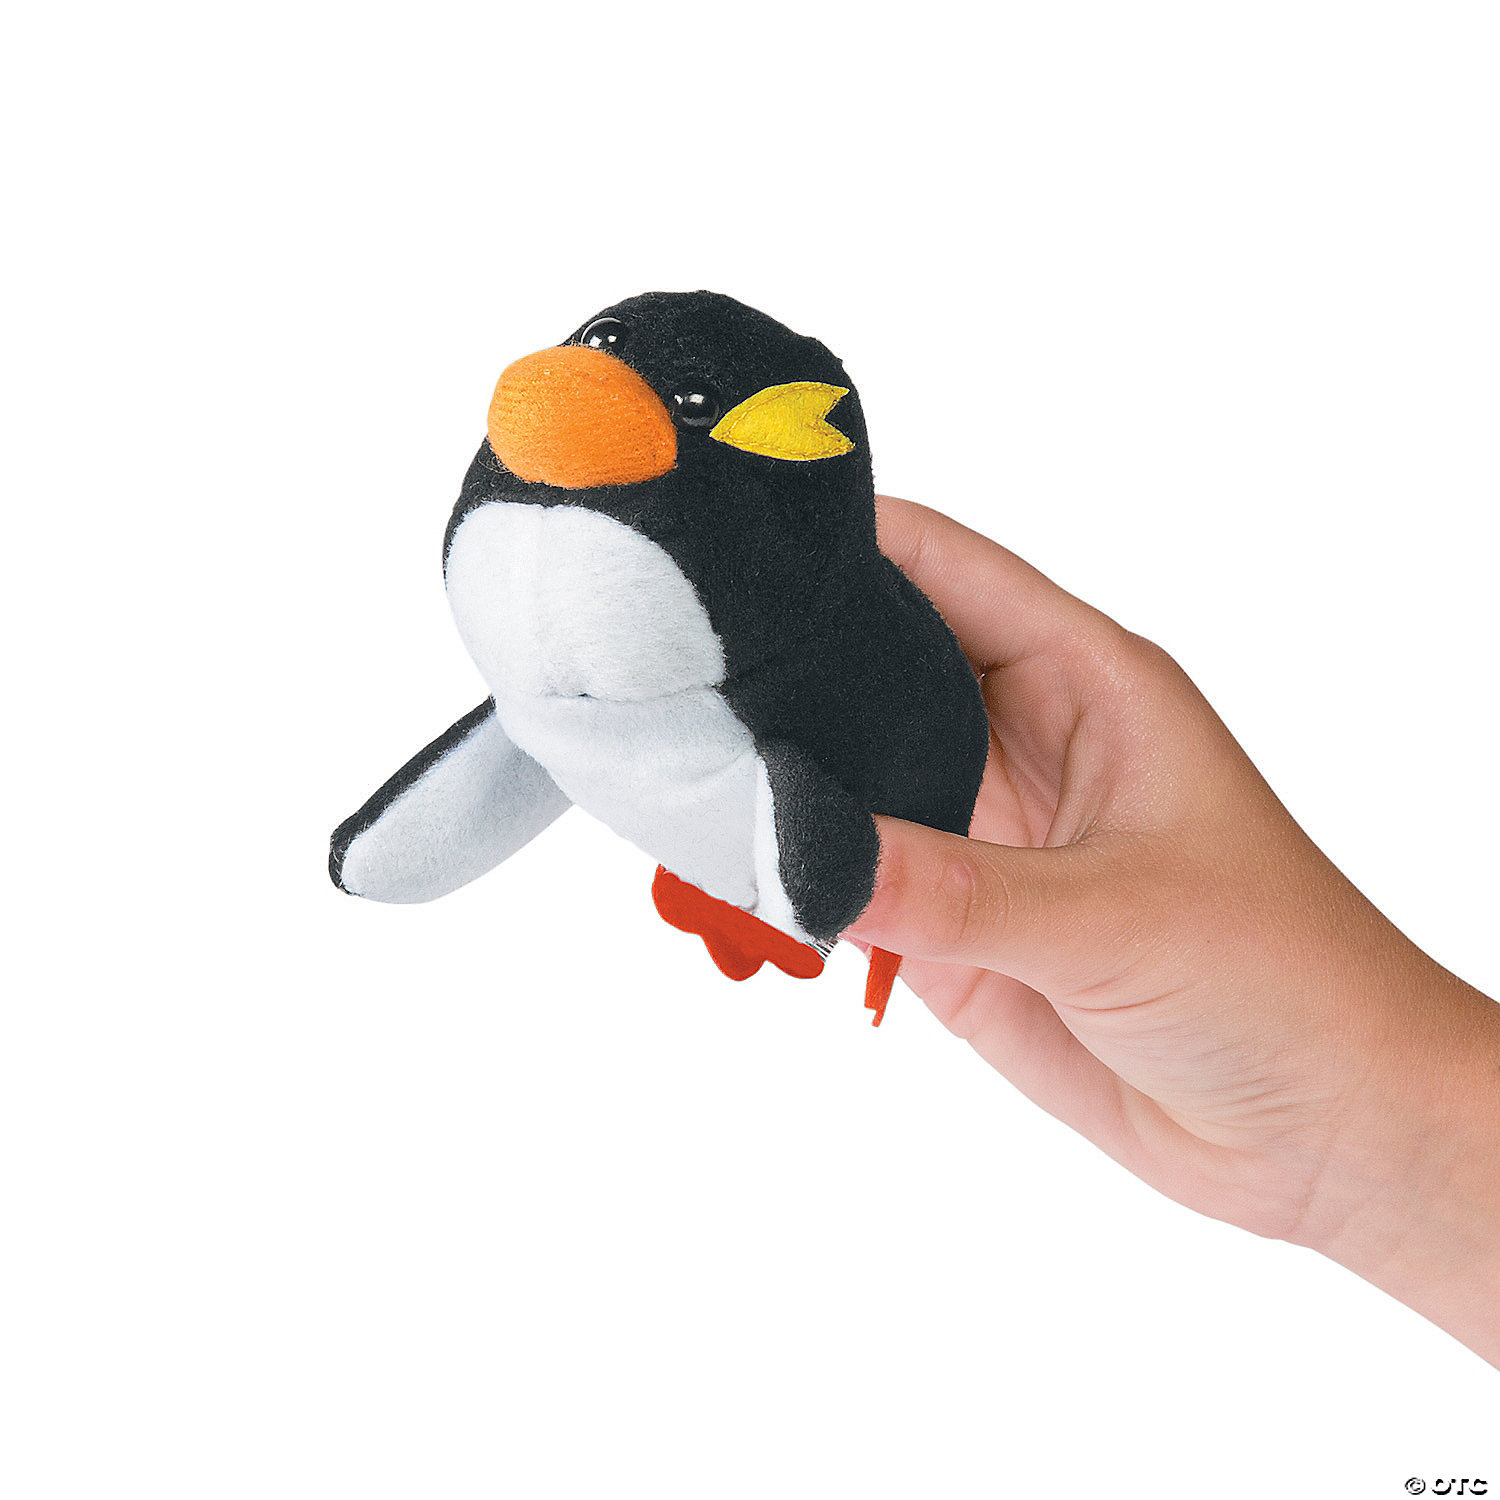 where to buy a stuffed penguin